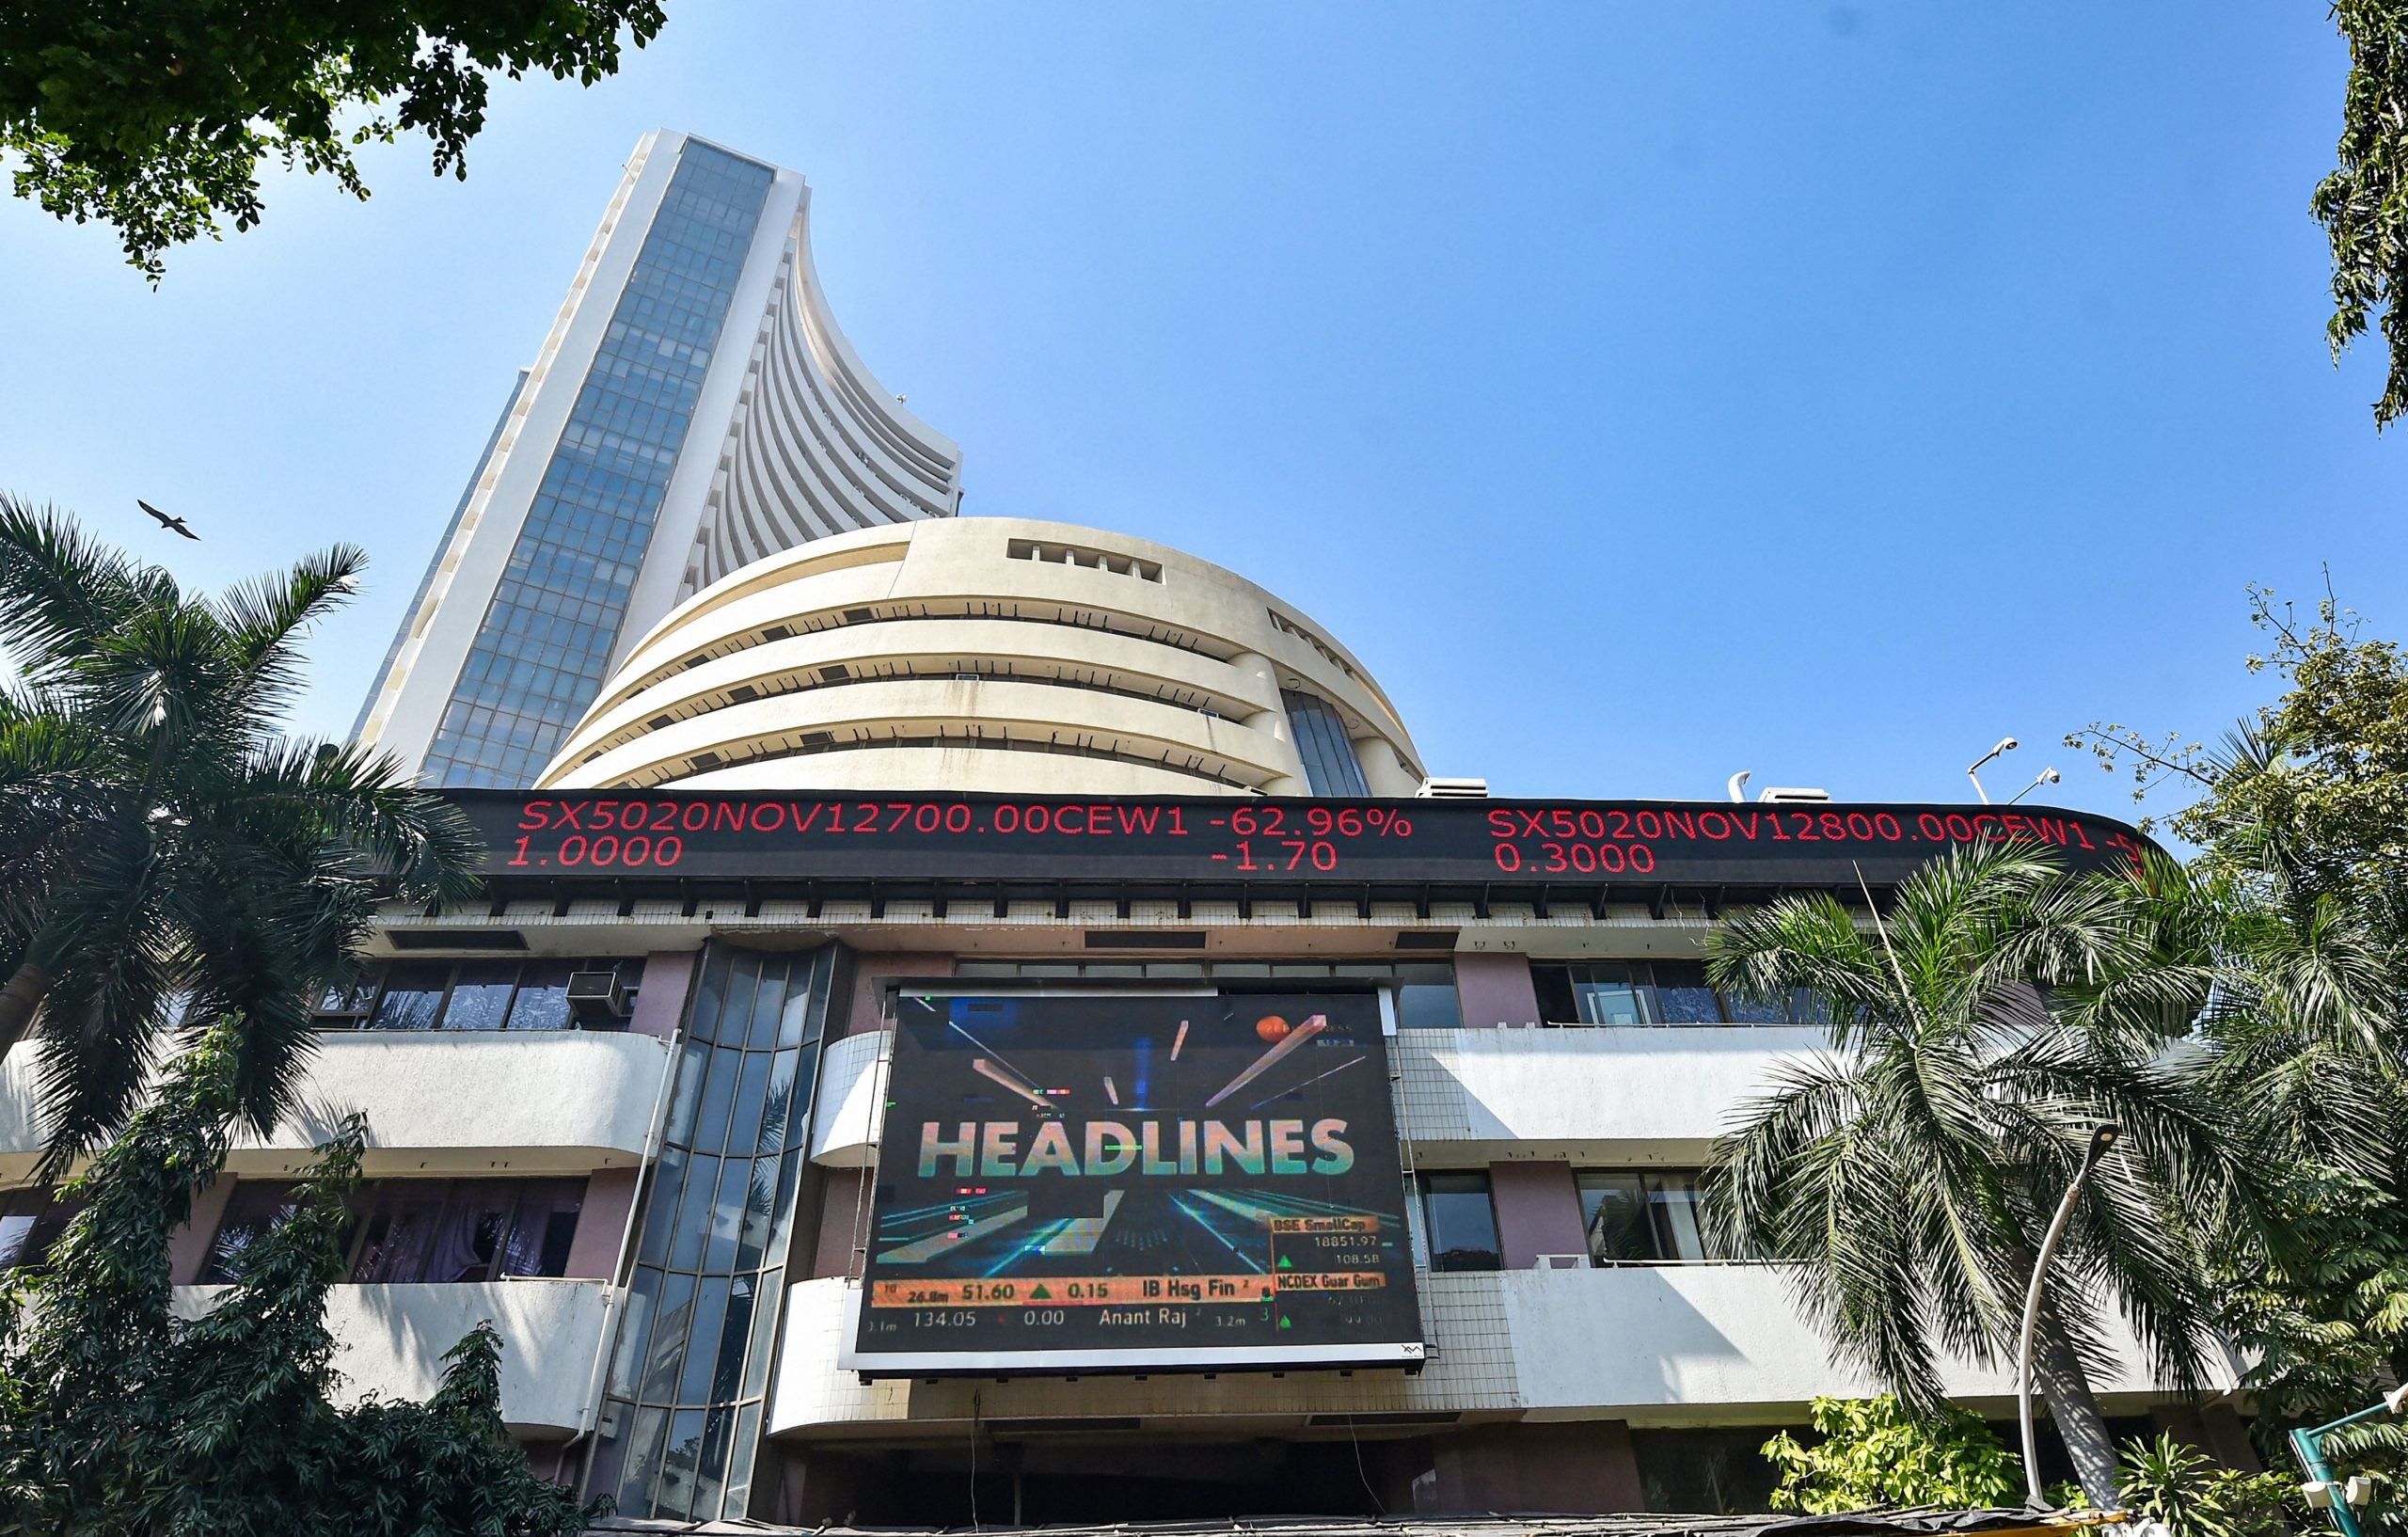 Trending Stocks: Coal India, Airtel, Lyka, Vodafone Idea and others in news today